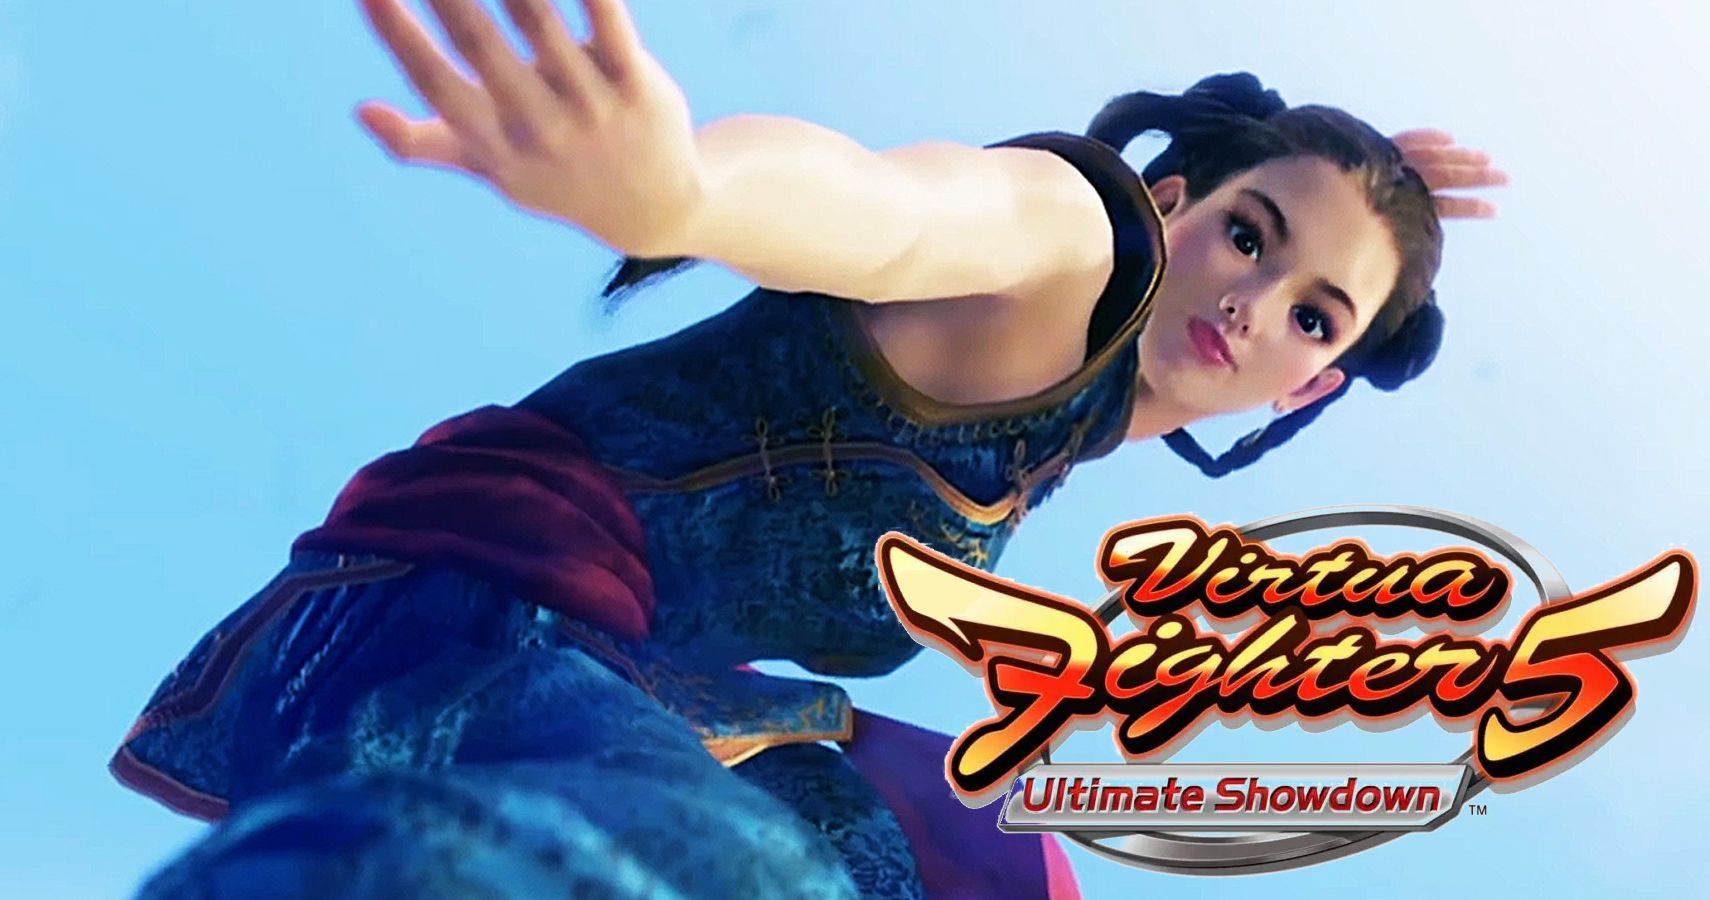 Sega Is Using Virtua Fighter 5 Ultimate Showdown To Gauge Interest In A Potential Sequel